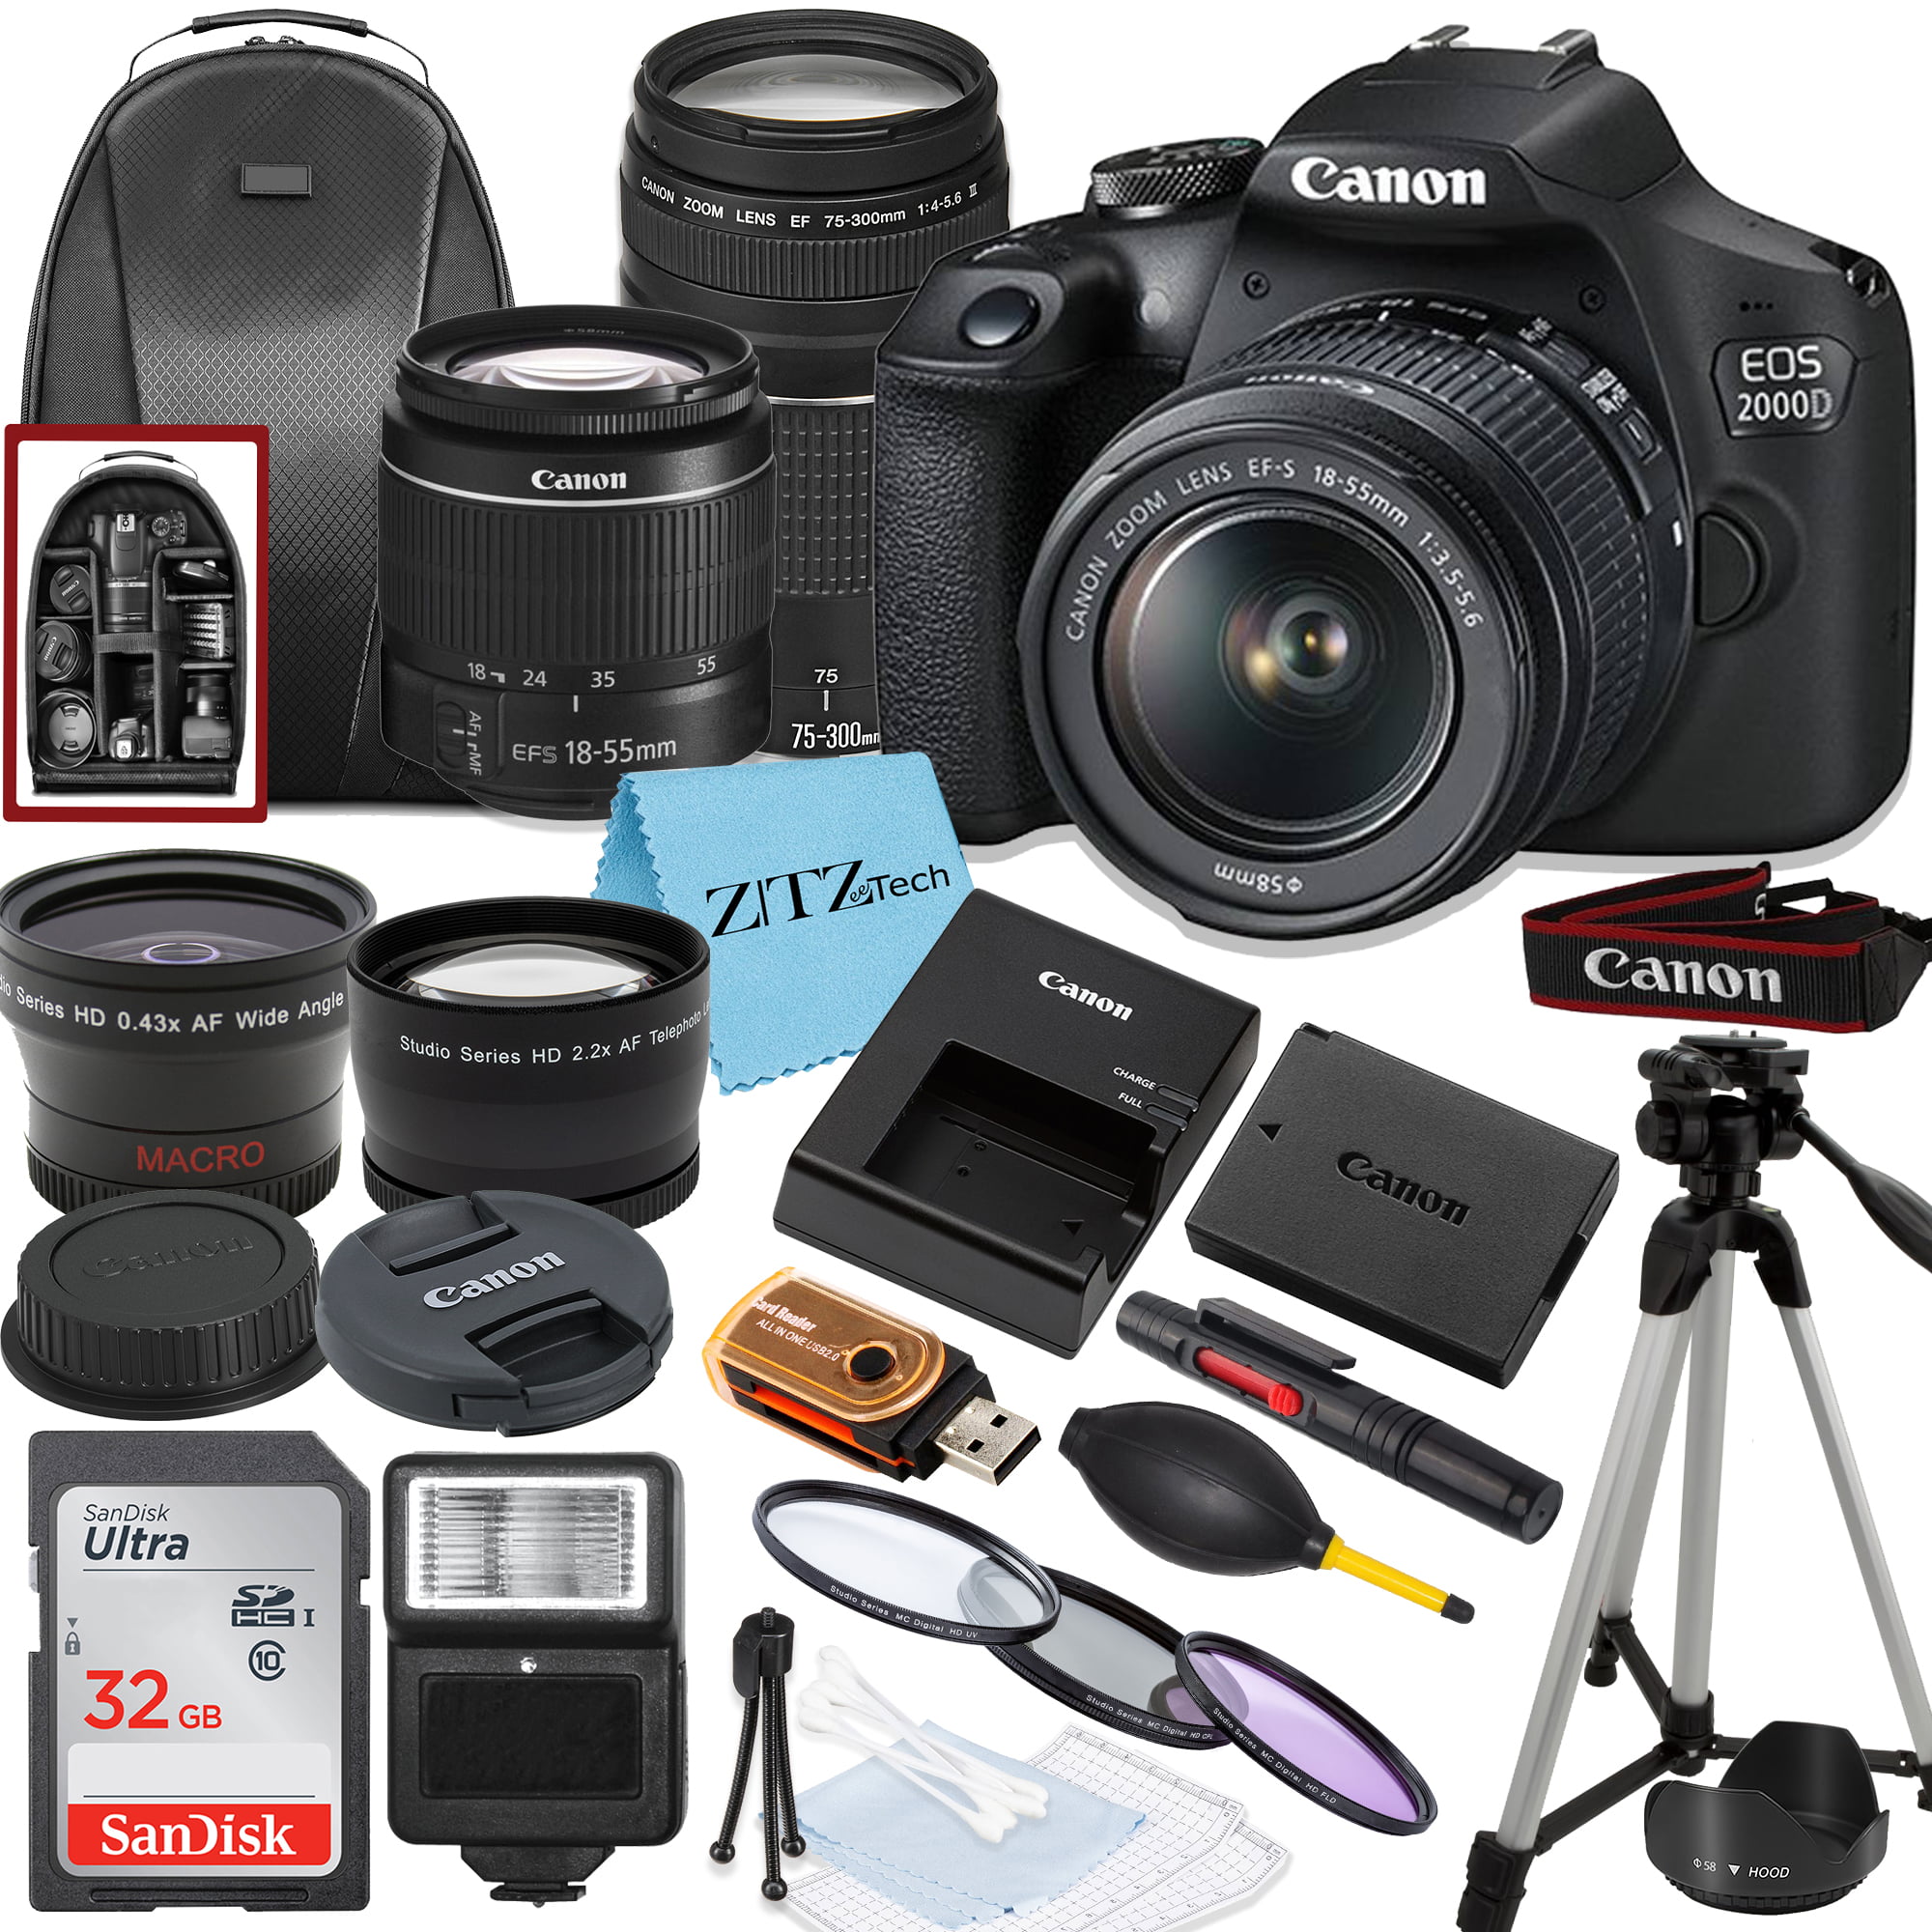 Canon EOS 2000D / Rebel T7 DSLR Camera with 18-55mm, 75-300mm Lens, SanDisk 32GB Memory, Tripod, Backpack and ZeeTech Bundle